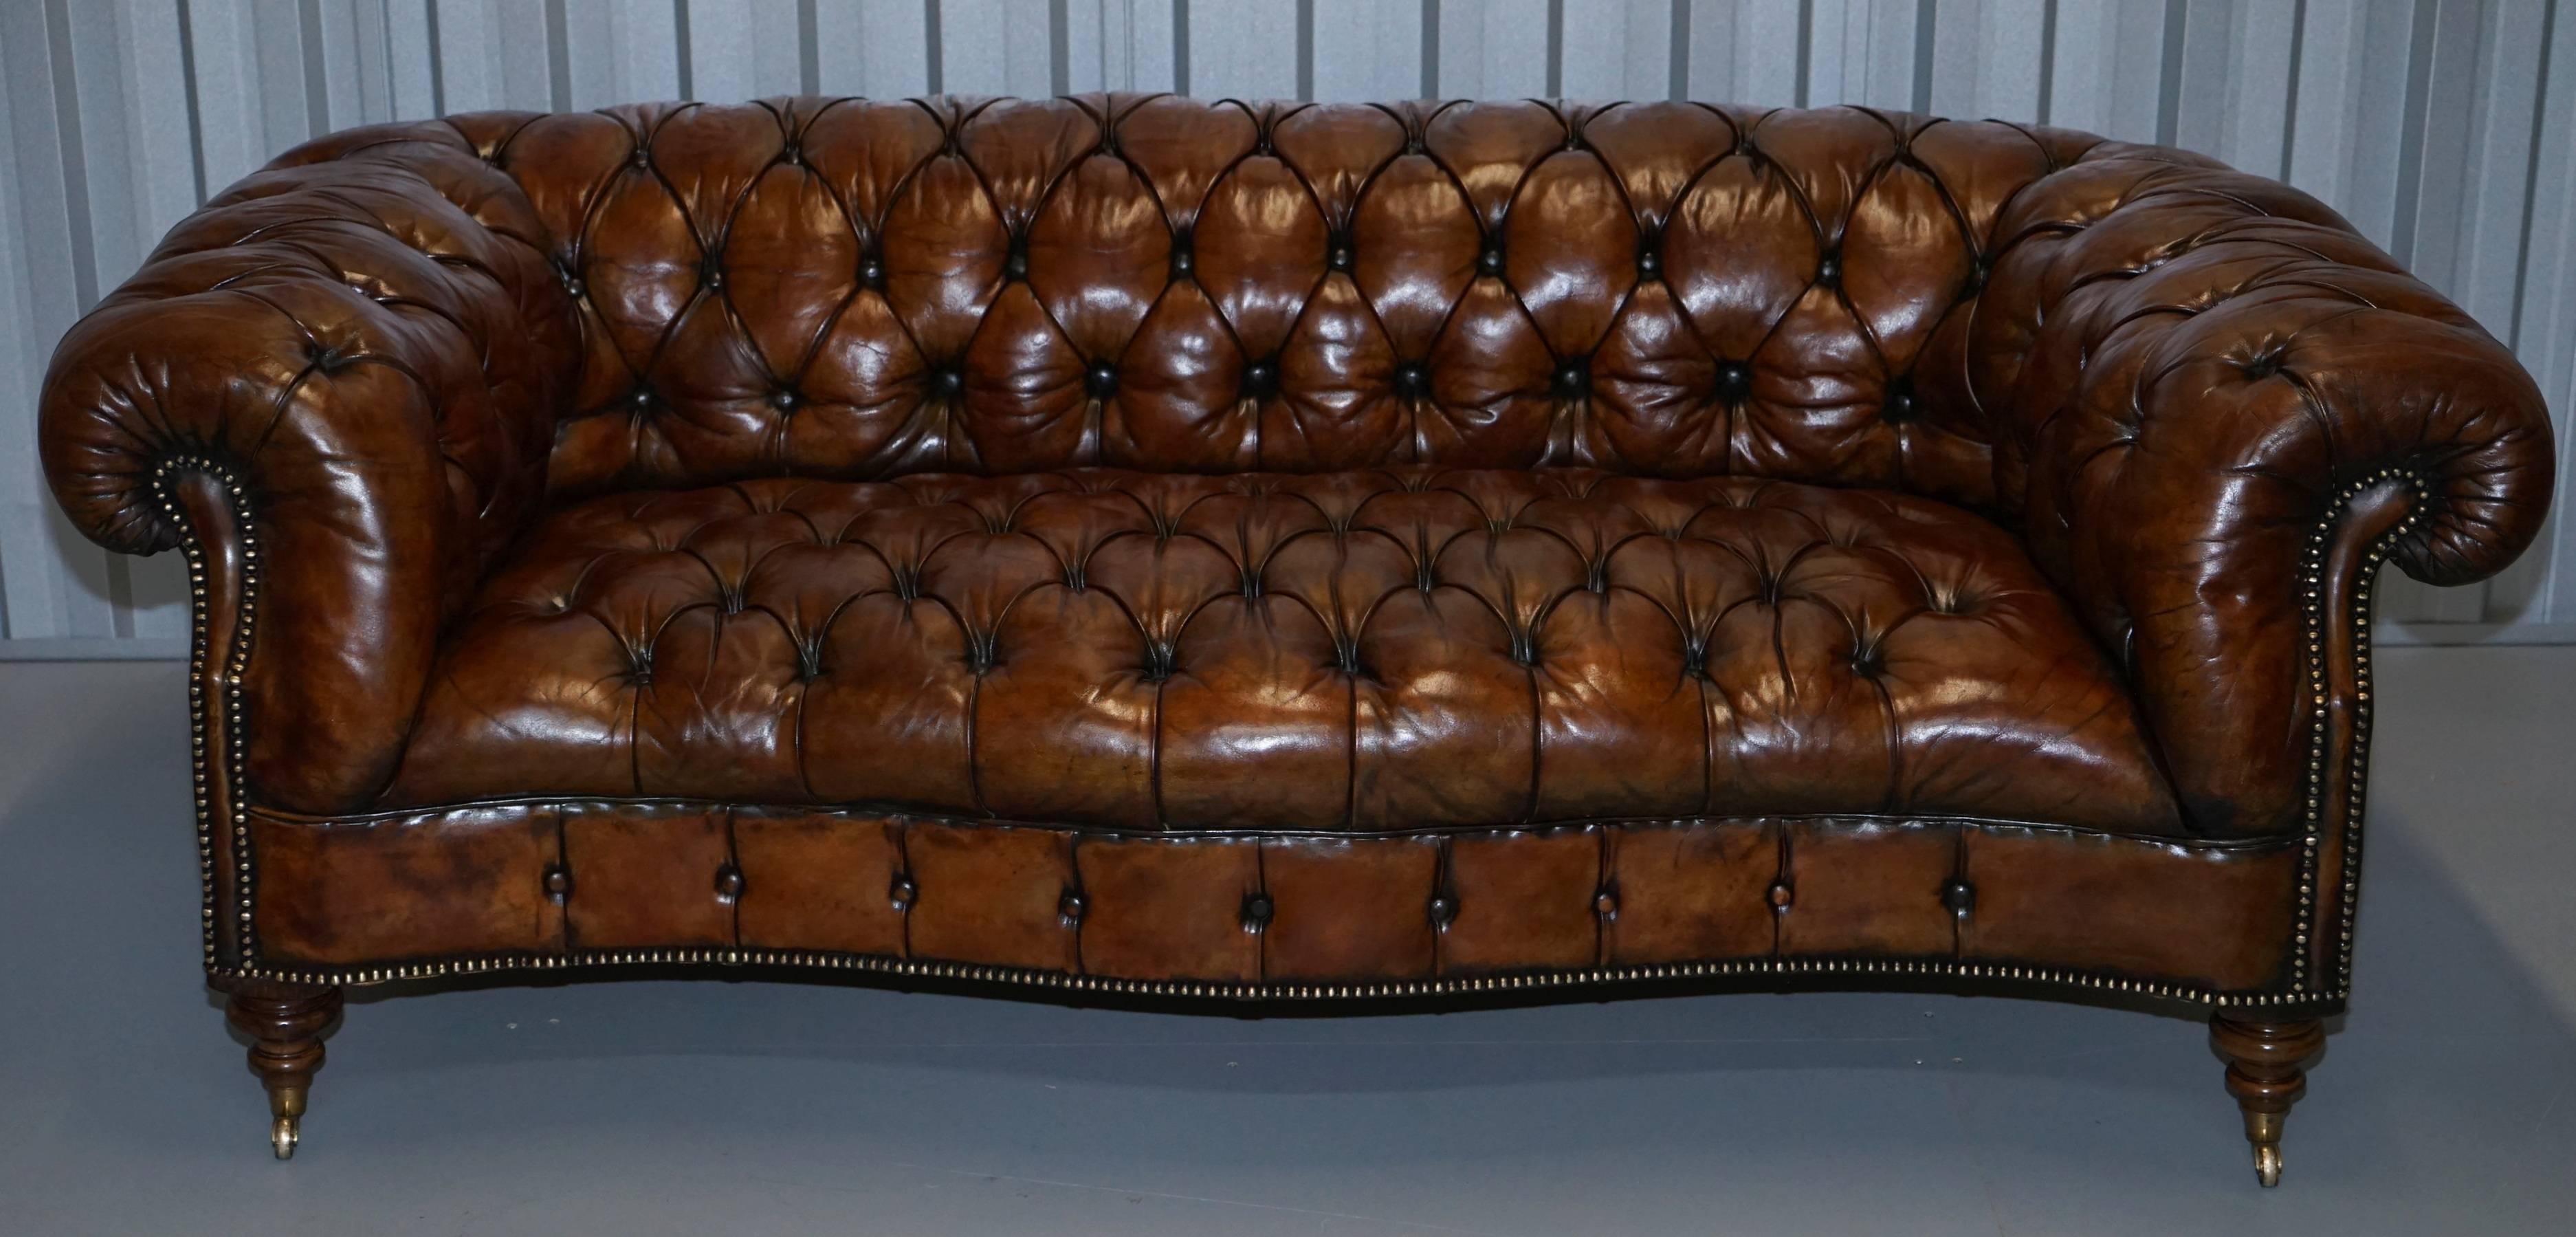 19th Century Pair of Fully Restored Howard & Son's Style Victorian Chesterfield Leather Sofas